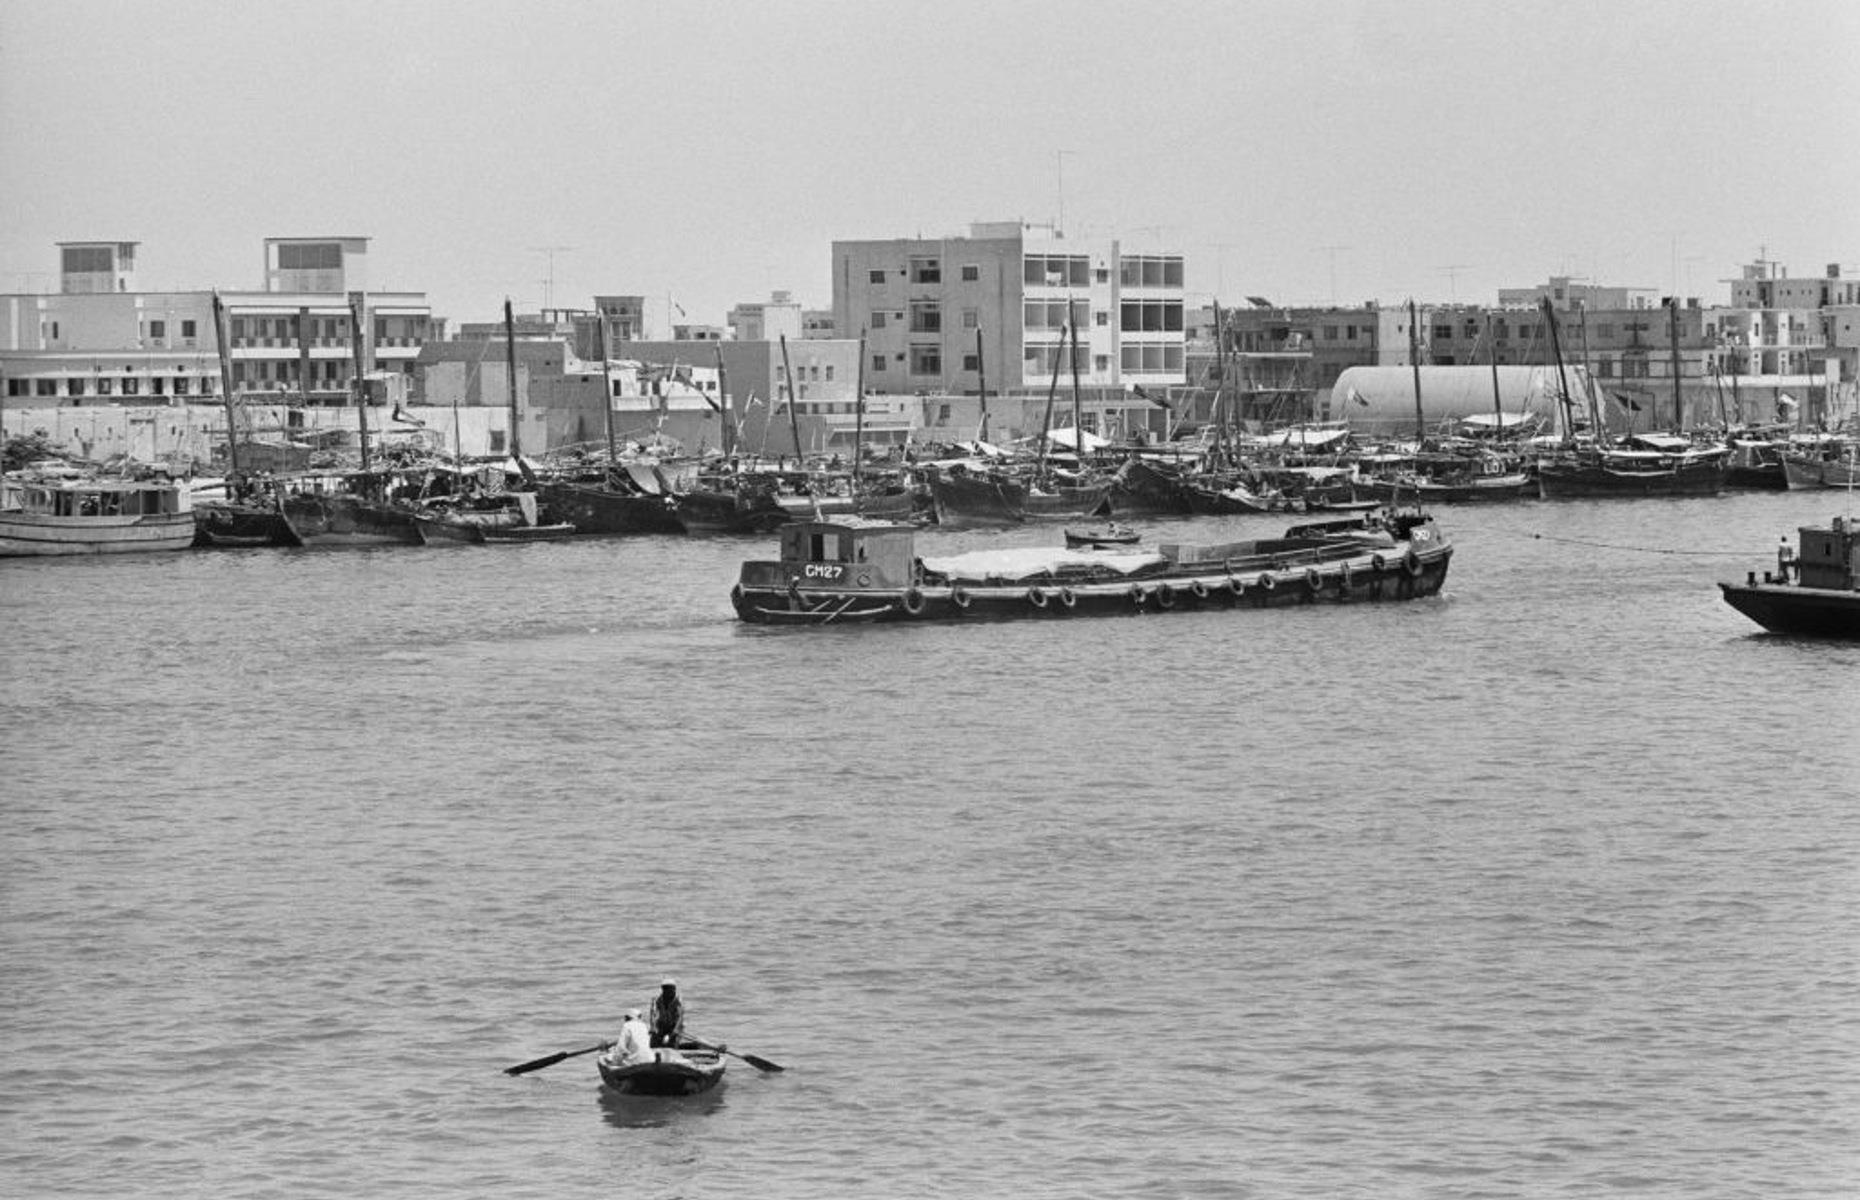 It was the discovery of oil in the late 1960s that transformed Dubai from a small port to the futuristic city we see today. Back in 1900, Dubai was established as a free port which meant no taxes were paid. The nearby village of Jumeirah, which consisted of a few simple huts, made money from pearl fishing. This trade went into decline when cultured pearls became available in the 1930s, causing great poverty in the area.